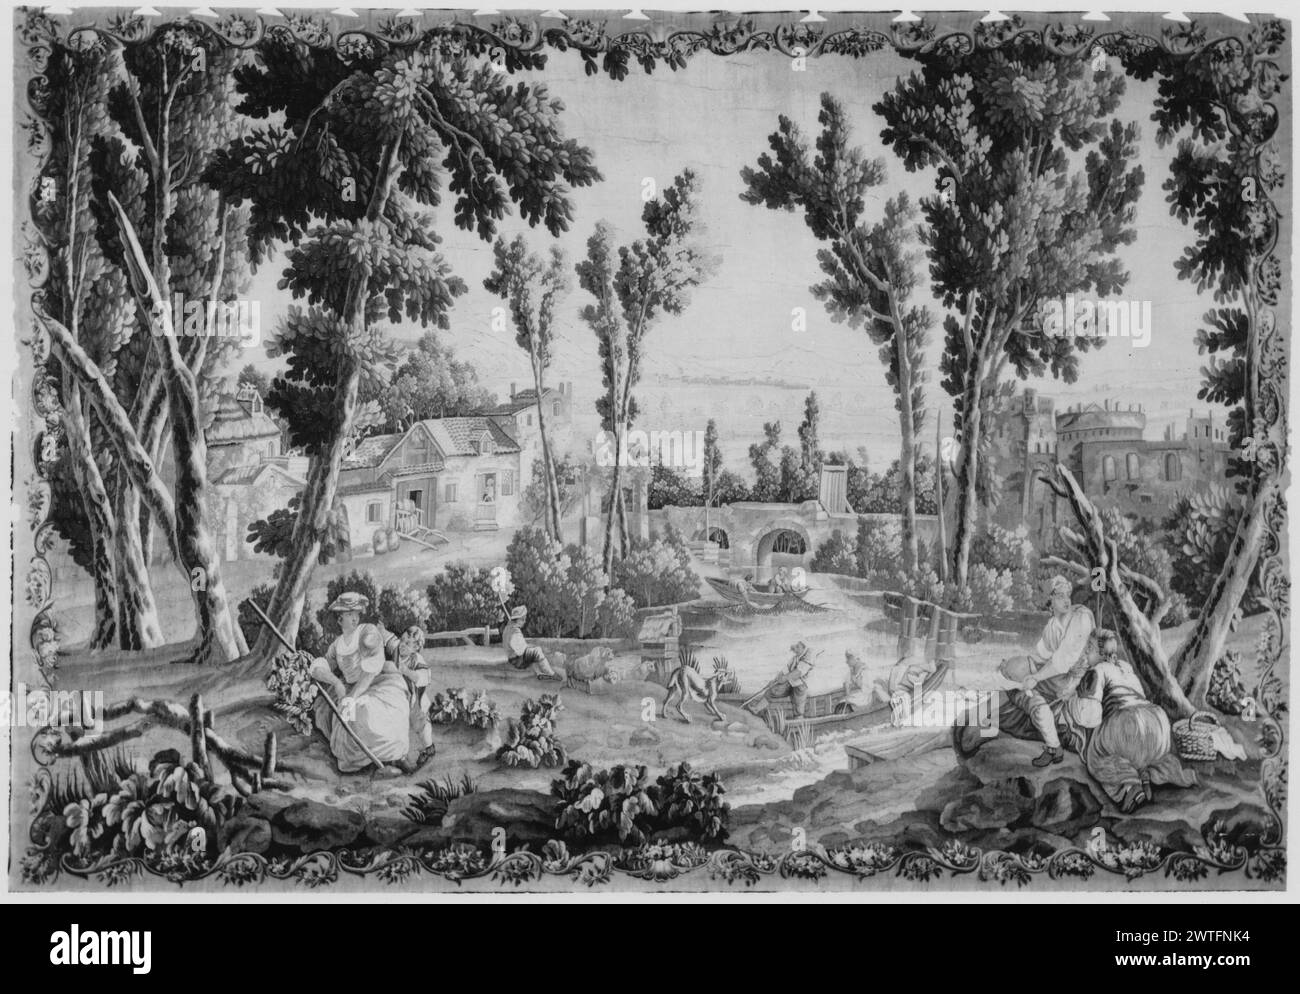 Farmers resting, fishing at outskirts of village. unknown c. 1770-1790 Tapestry Dimensions: H 8'5' x W 12'6' Tapestry Materials/Techniques: unknown Culture: French Weaving Center: Aubusson Ownership History: French & Co. In river landscape with trees, flowering plants & with fishermen in boats dragging nets & others embarking, a shepherdess with young child sits on ground, a basket of flowers at her side (L) & looks in direction of couple seated on grassy mound, conversing & the woman kneeling before young man (R); farmhouse (L) & additional buildings with bridge in background (BRD) garlanded Stock Photo